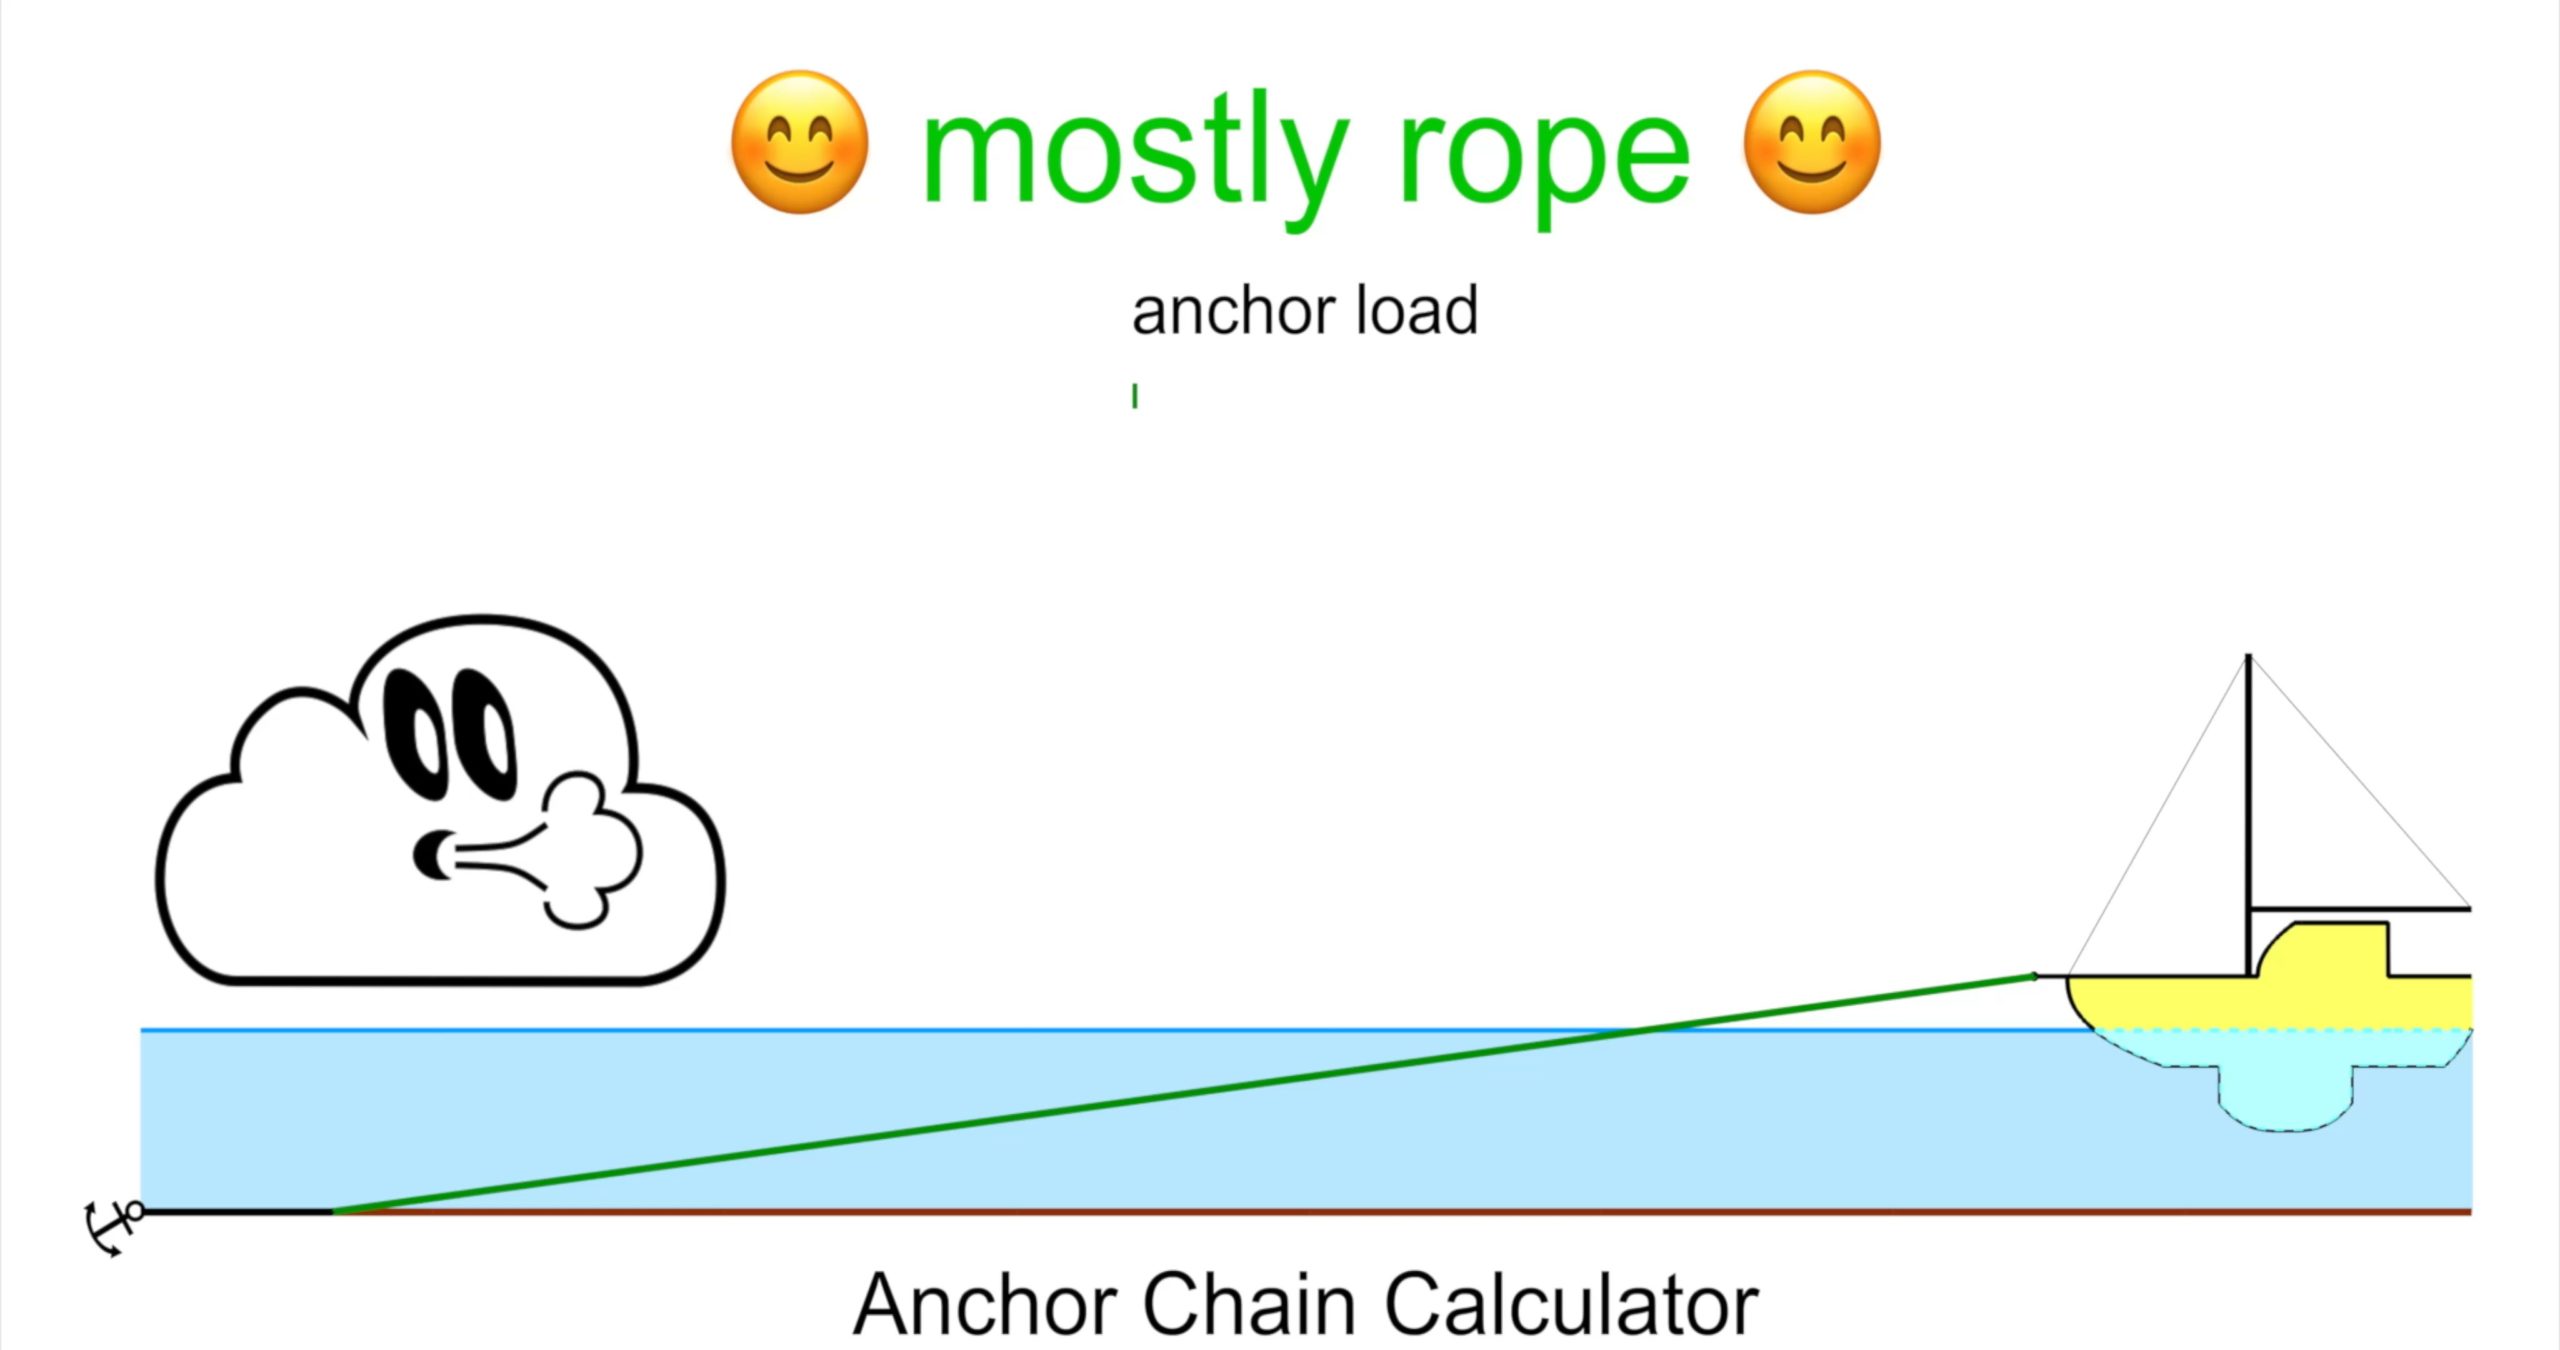 Anchor Chain Calculator (incl. rope) app for iOS and Android